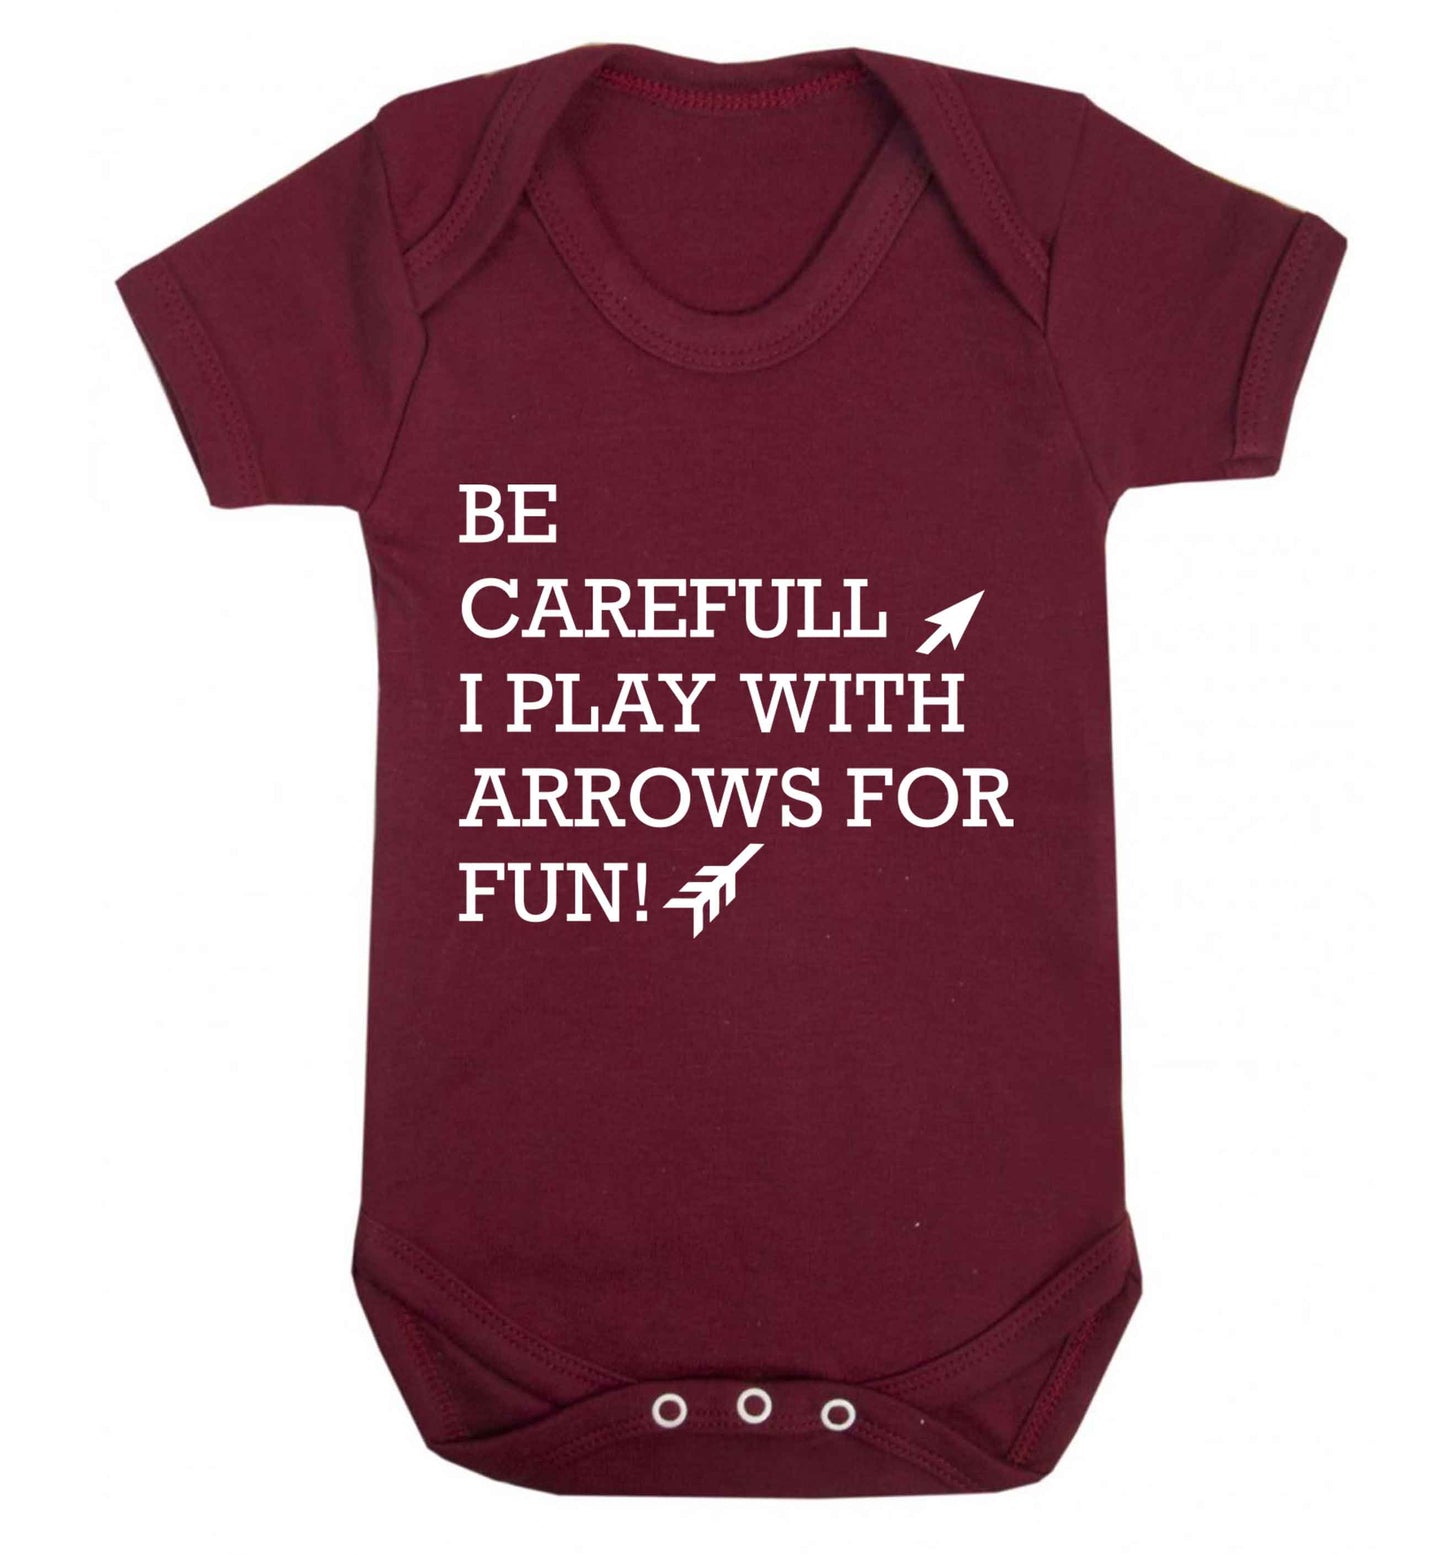 Be carefull I play with arrows for fun Baby Vest maroon 18-24 months